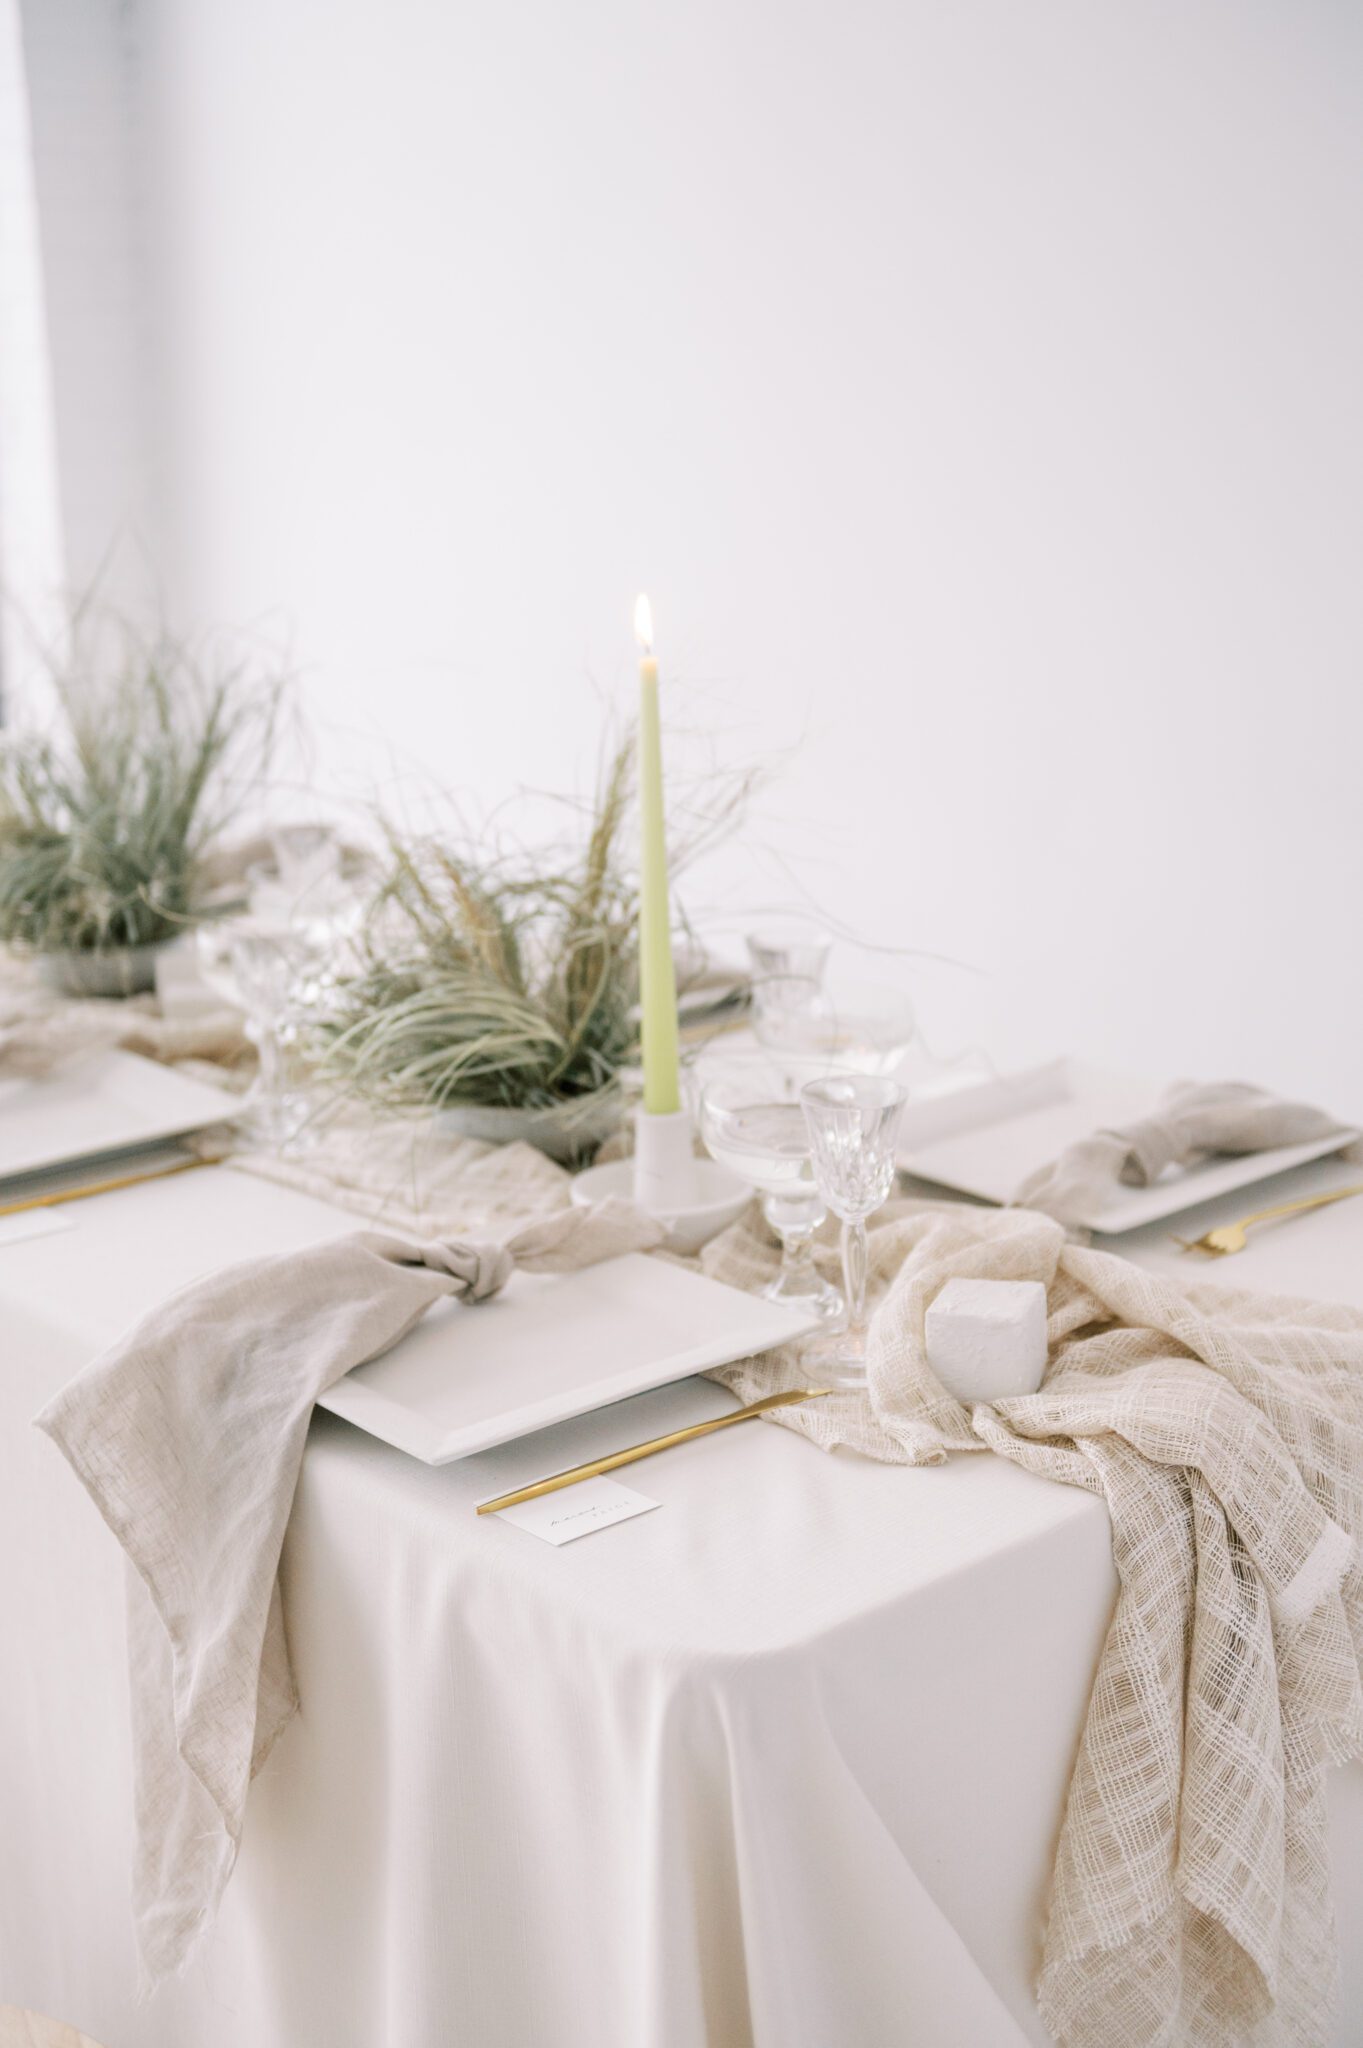 grass centrepieces featuring white and beige table scape, nature-inspired linen textures for table linens